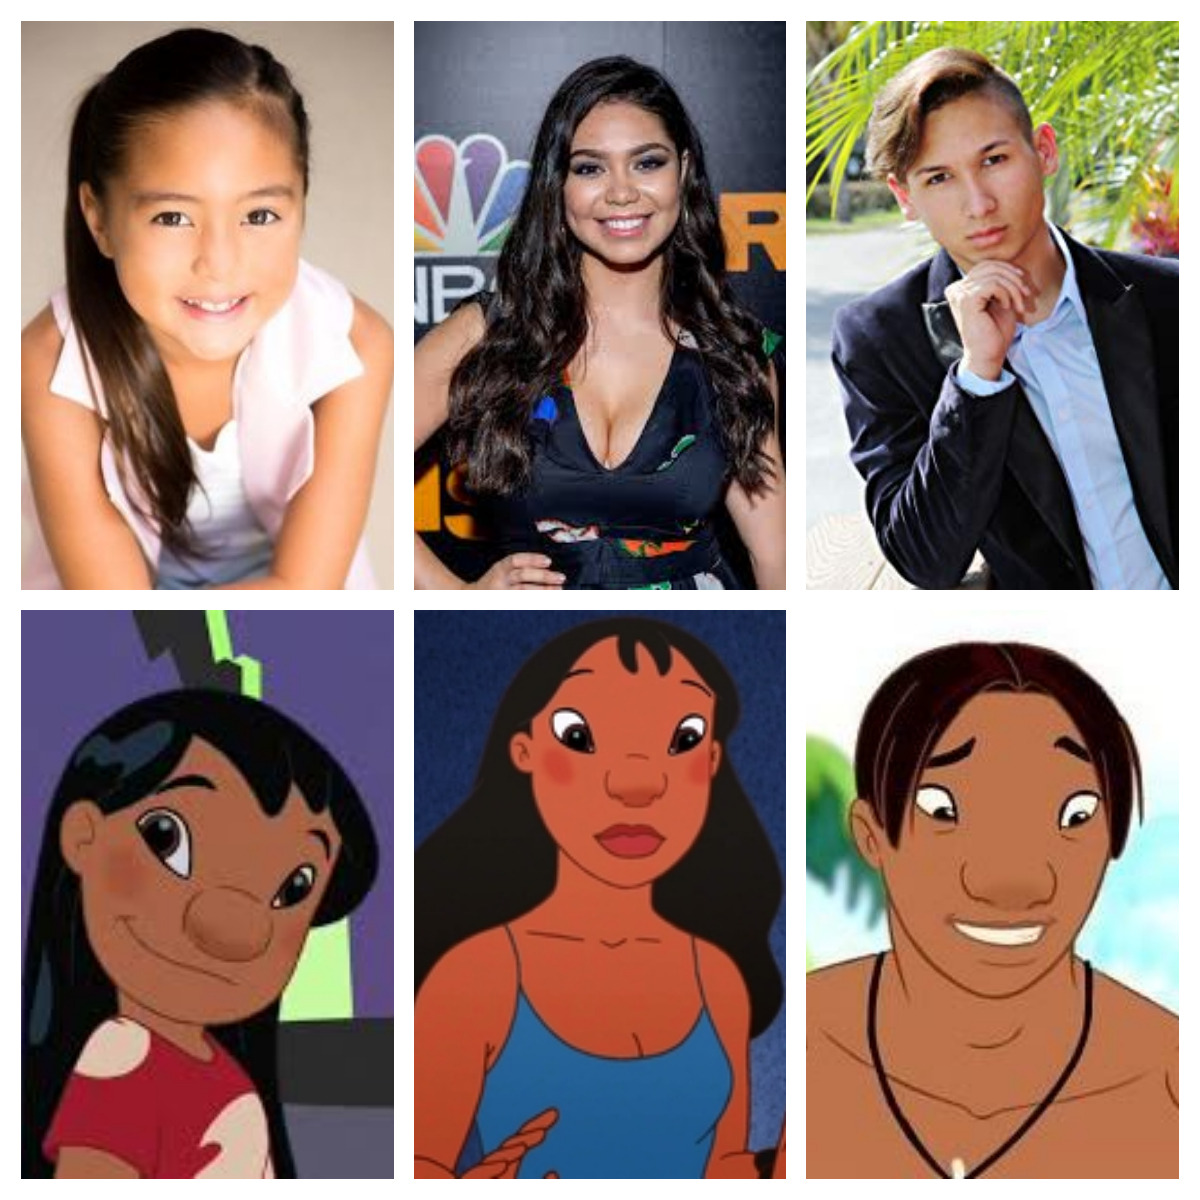 LILO AND STITCH LIVE ACTION DREAM CAST Kea PK as... you call it